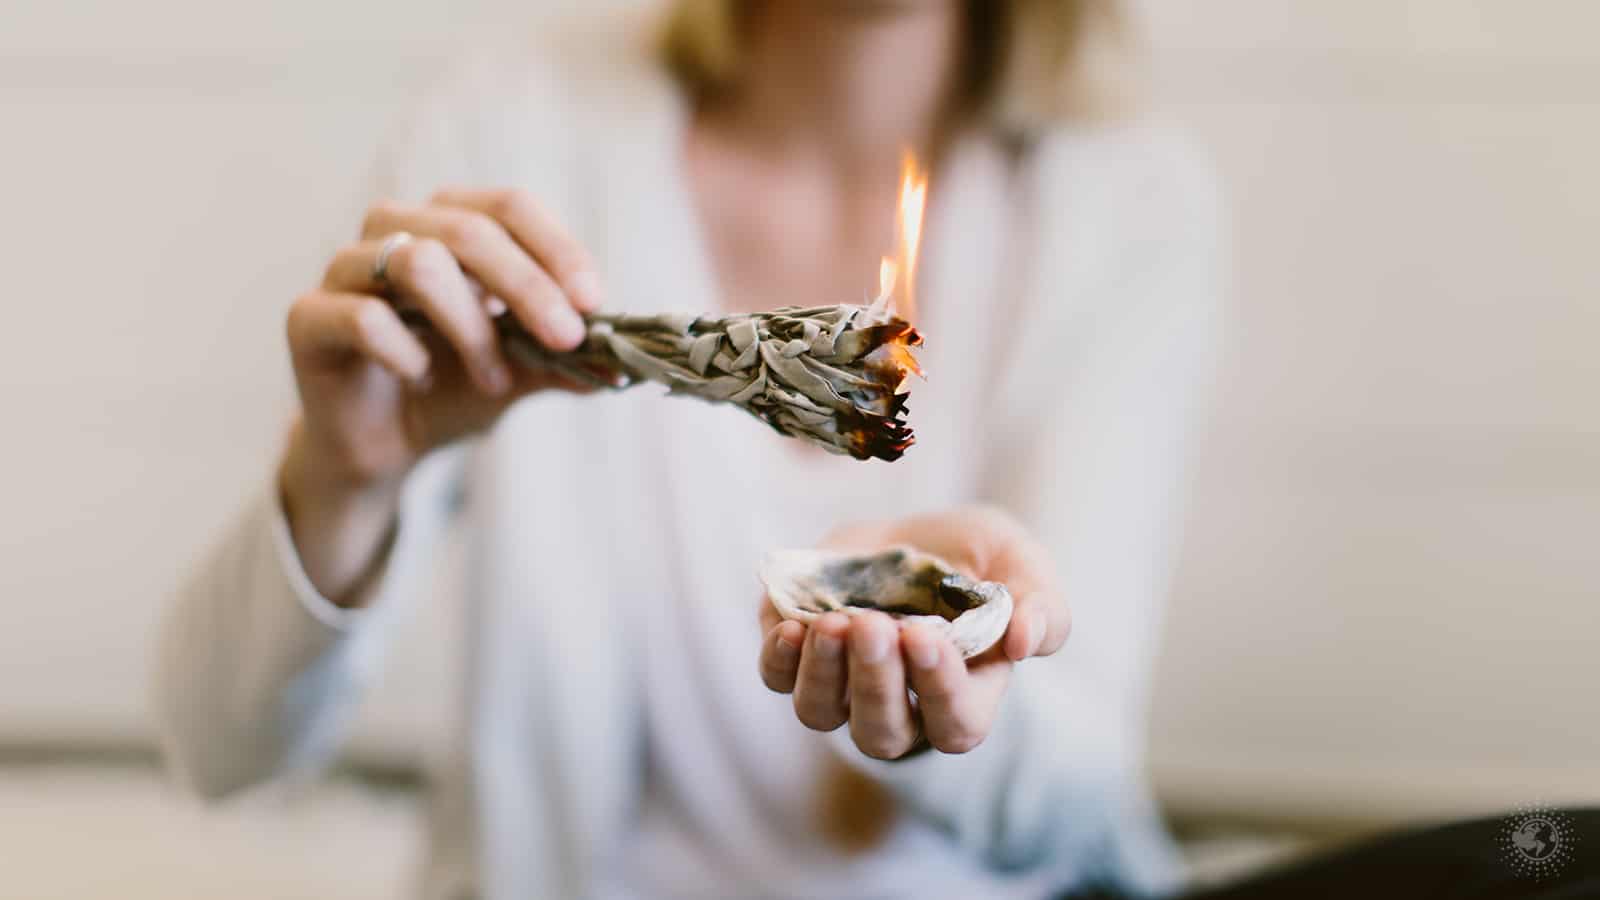 10 Healthy Benefits of Burning Sage in Your Home »